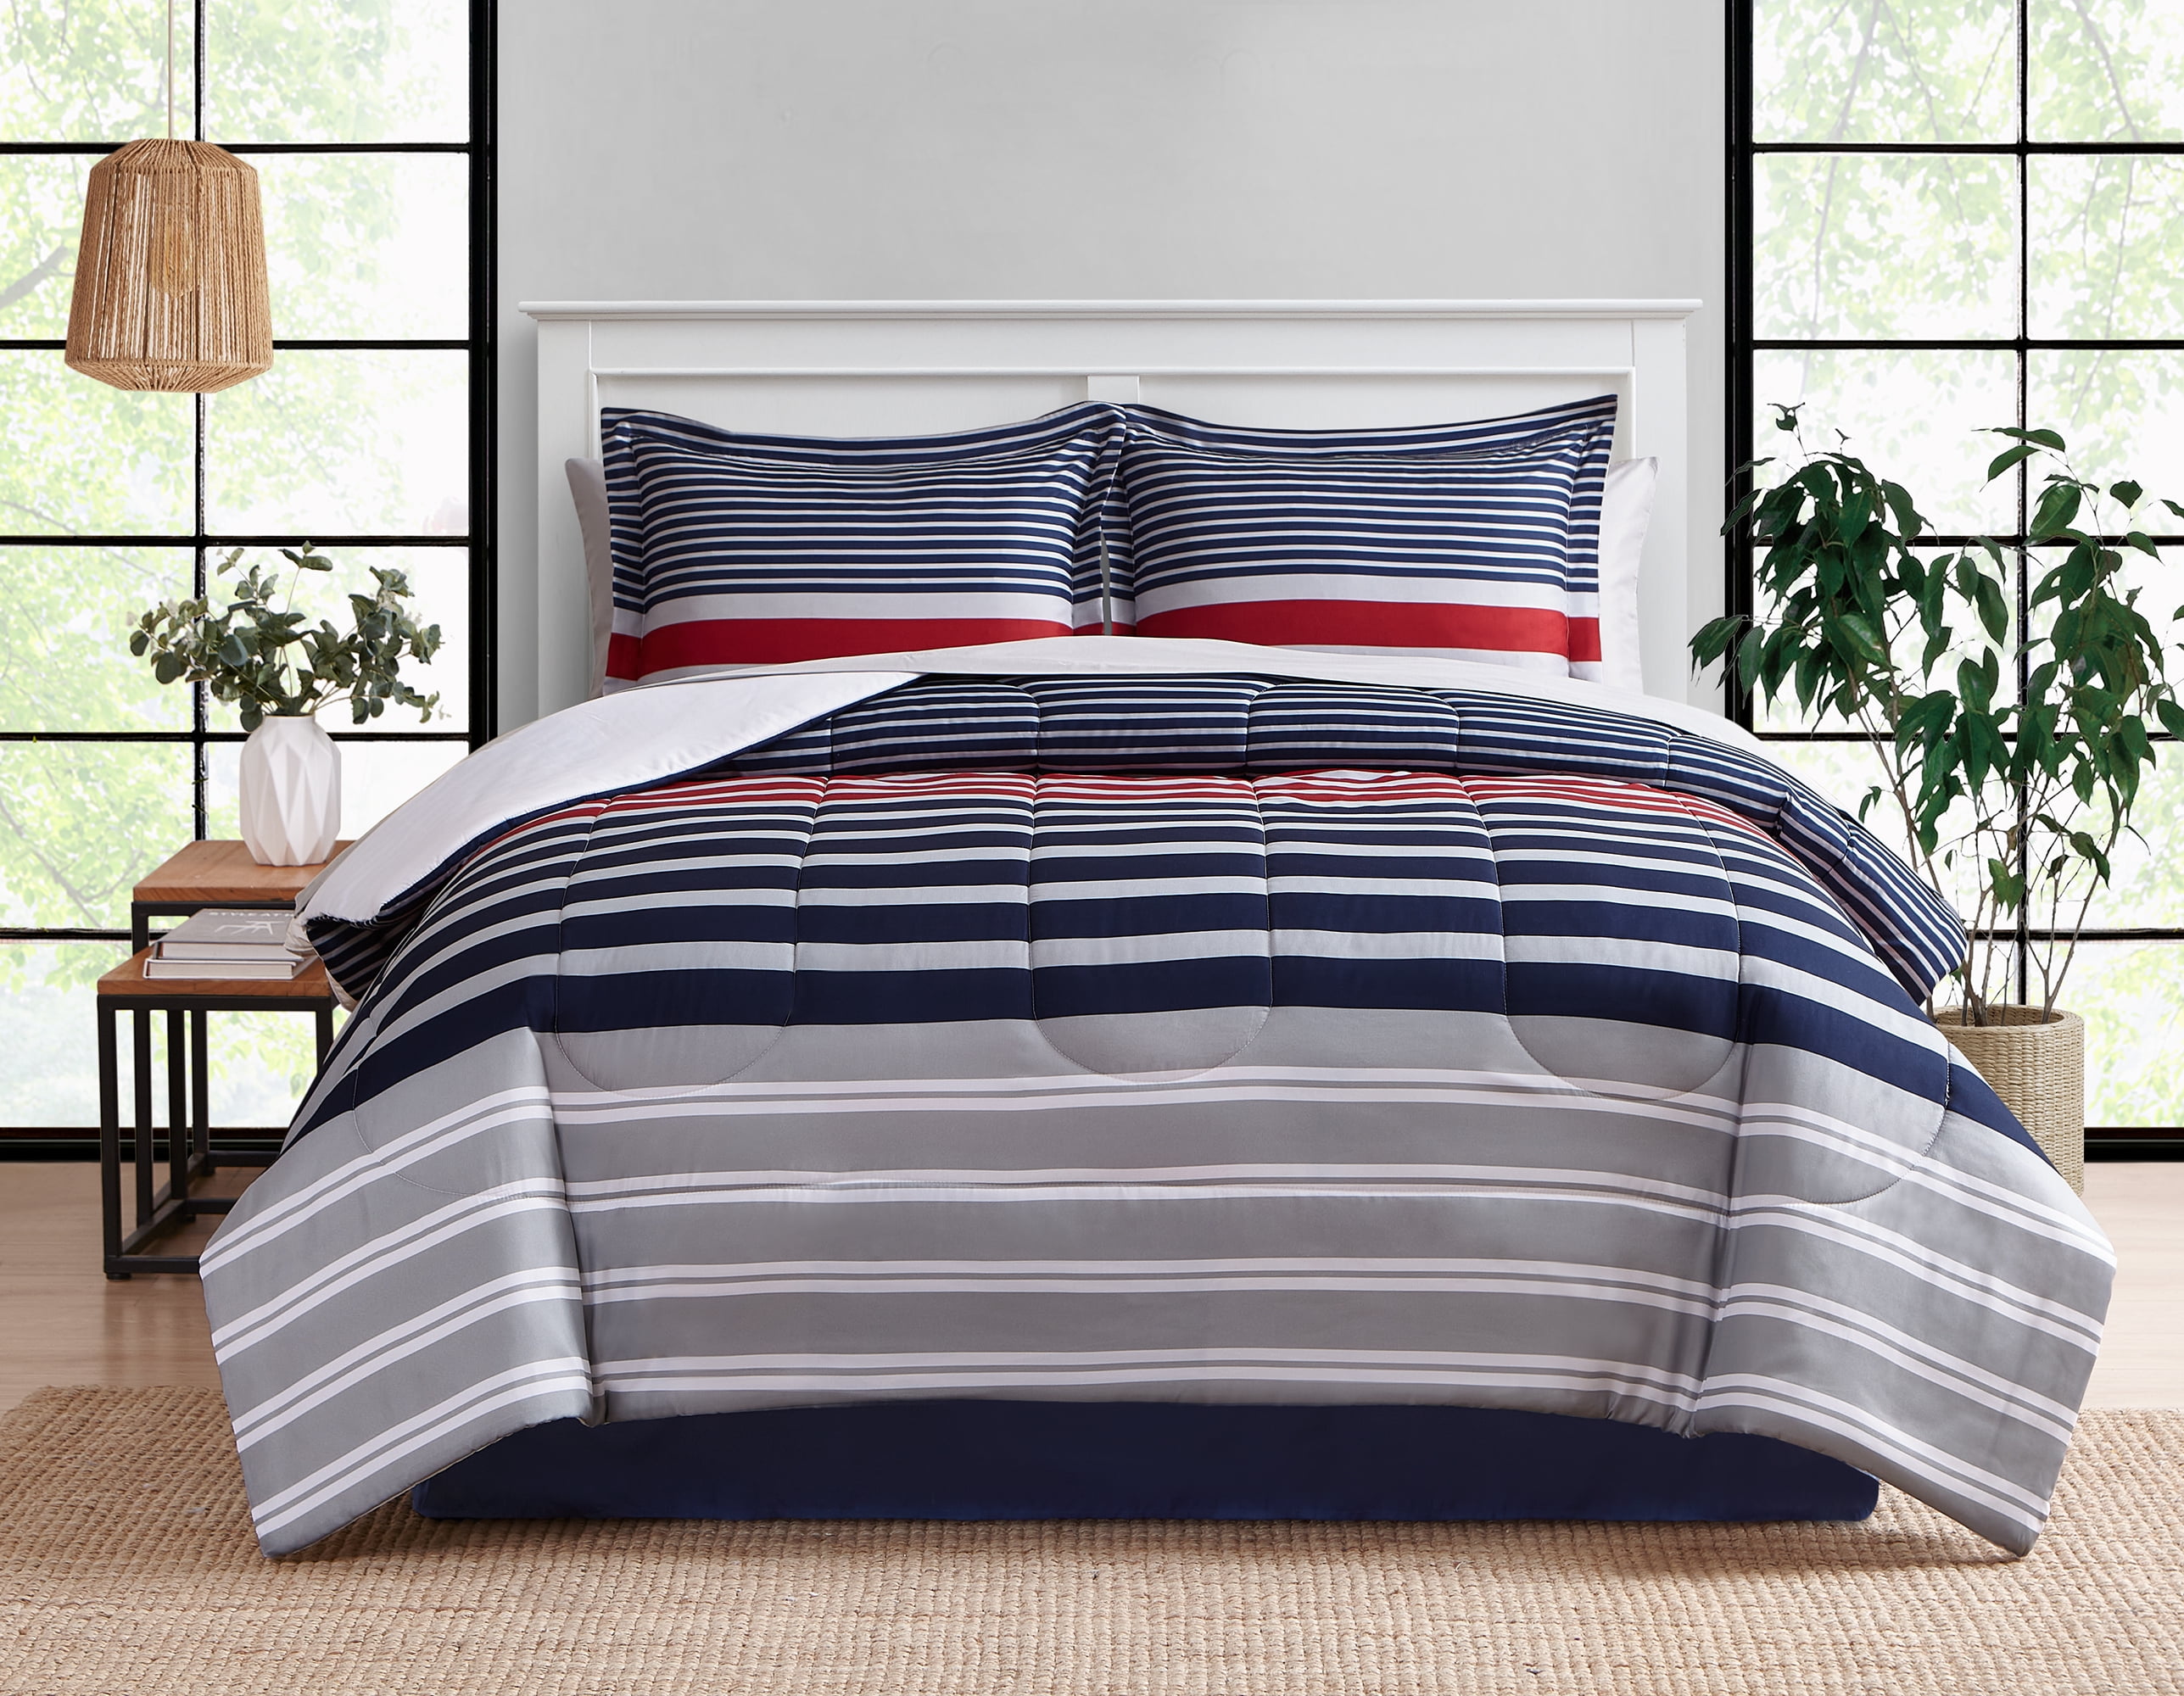 Queen King Bed Bag Navy Blue Red White Striped Block 10 pc Comforter Sheet Set 